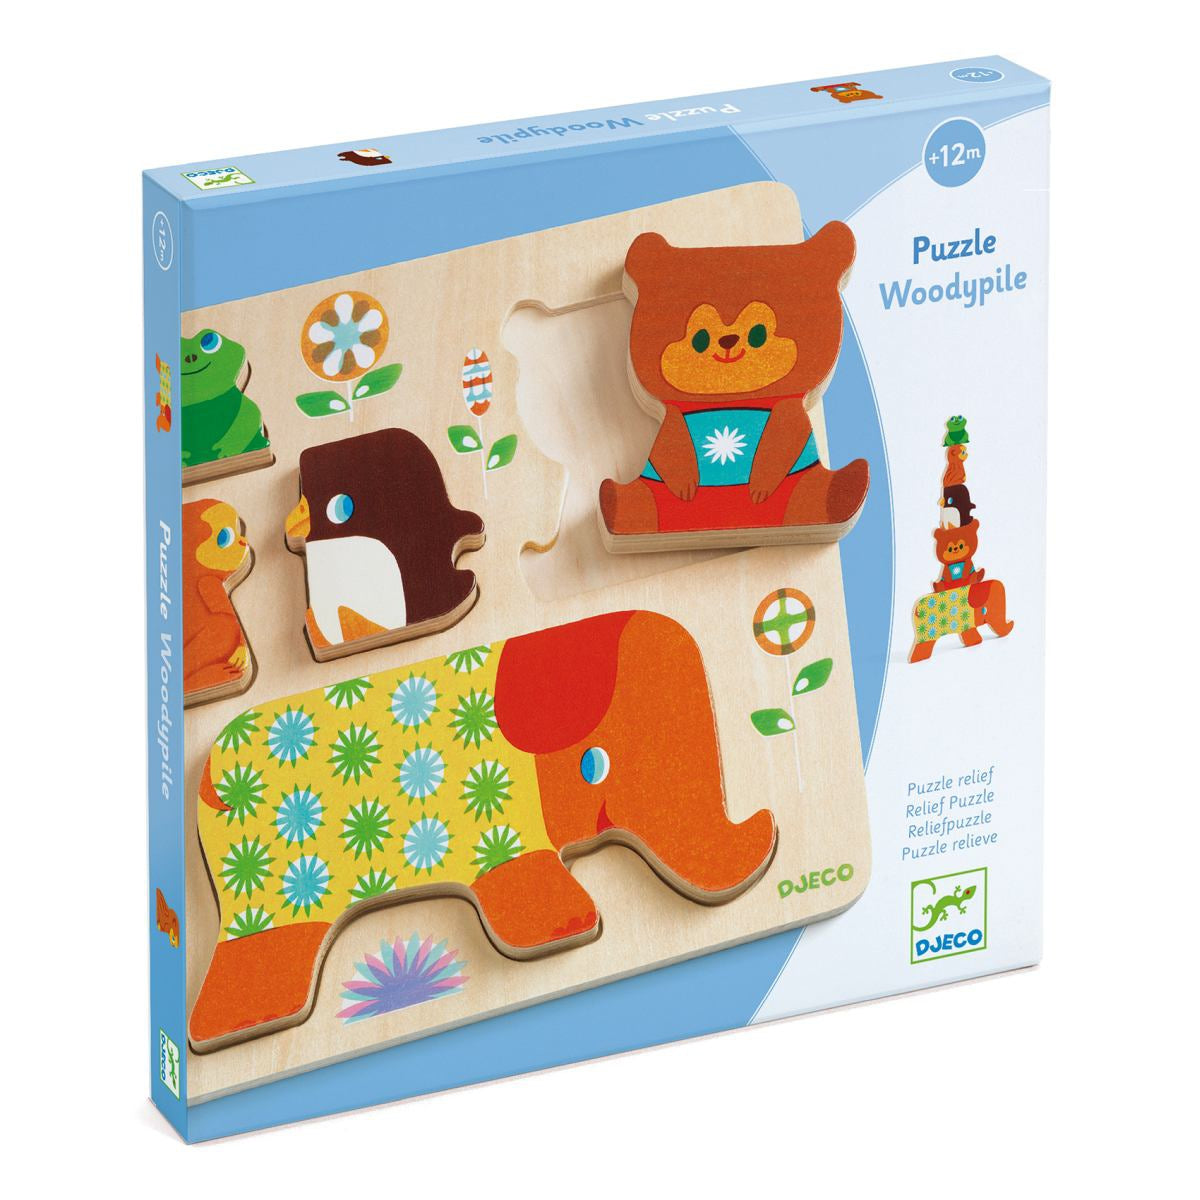 DJECO - Wooden Puzzle - Woodypile – SANNA baby and child